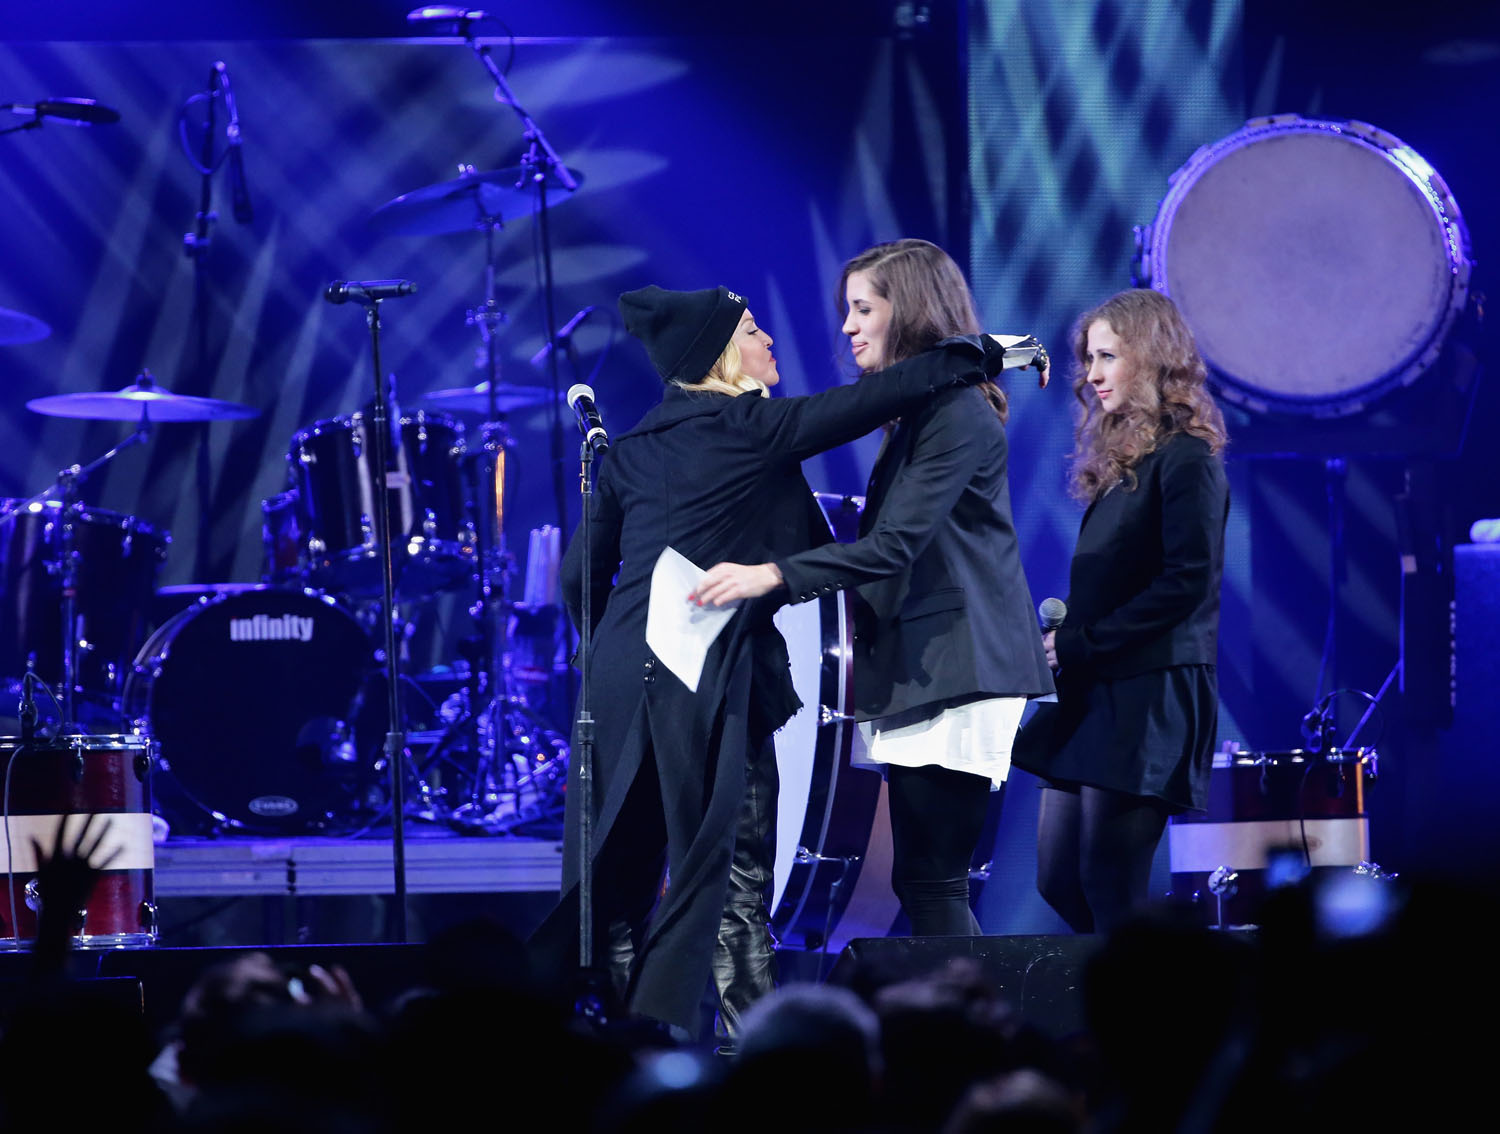 Madonna introduces Nadezhda Tolokonnikova, and Maria Alyokhina, formerly of Pussy Riot, onstage at the Amnesty International Concert presented by the CBGB Festival at Barclays Center on February 5, 2014 in New York City. (Neilson Barnard&mdash;2014 Getty Images)